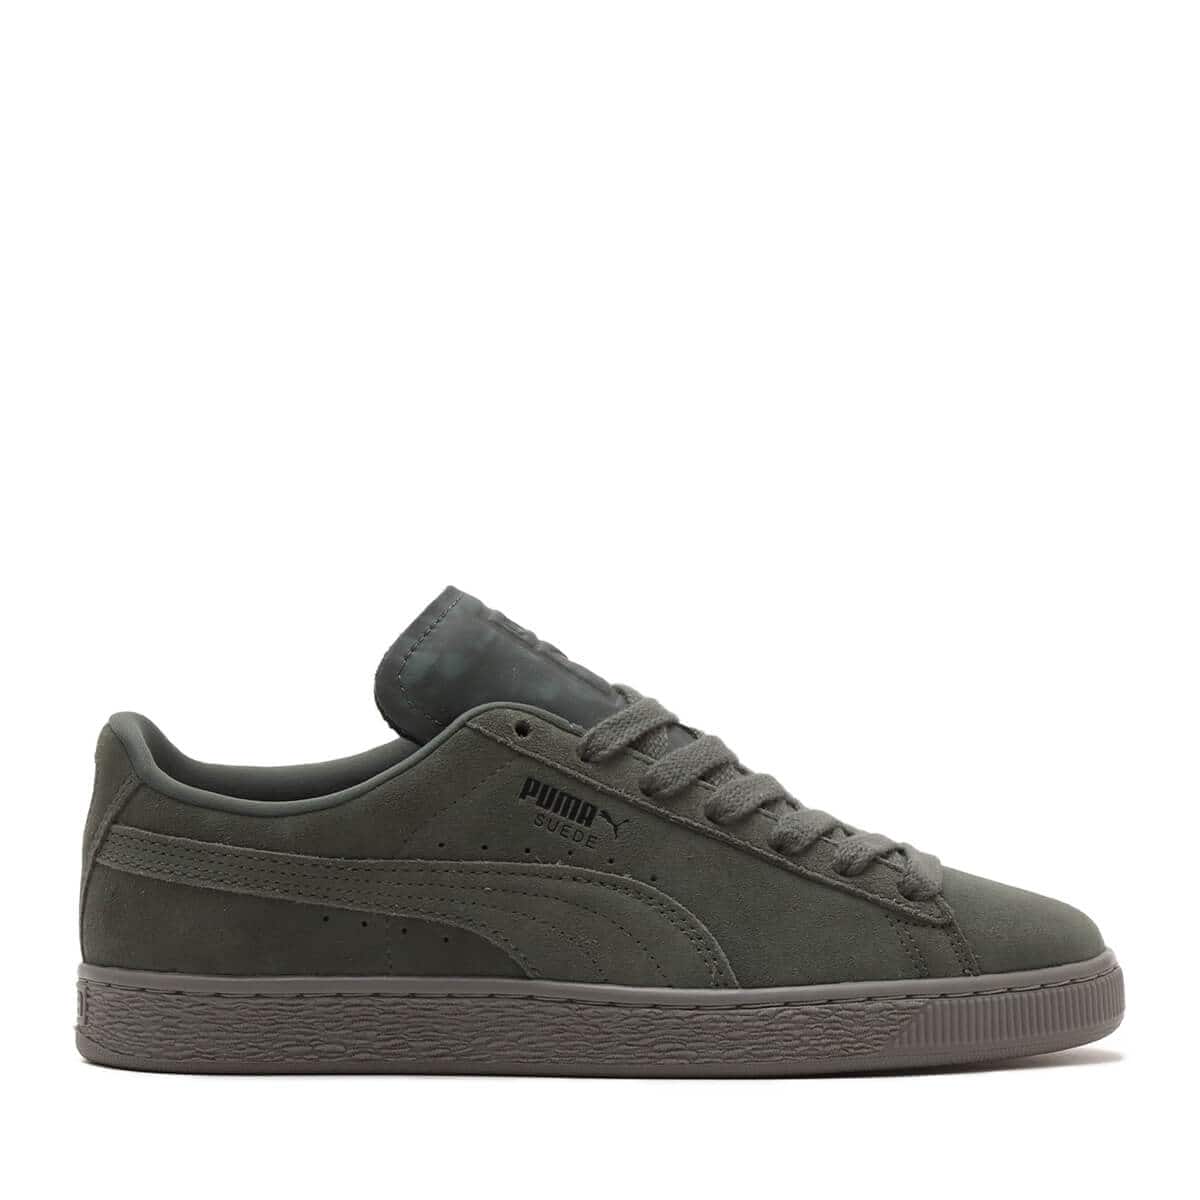 PUMA SUEDE LUX MINERAL GRAY 24SP-I